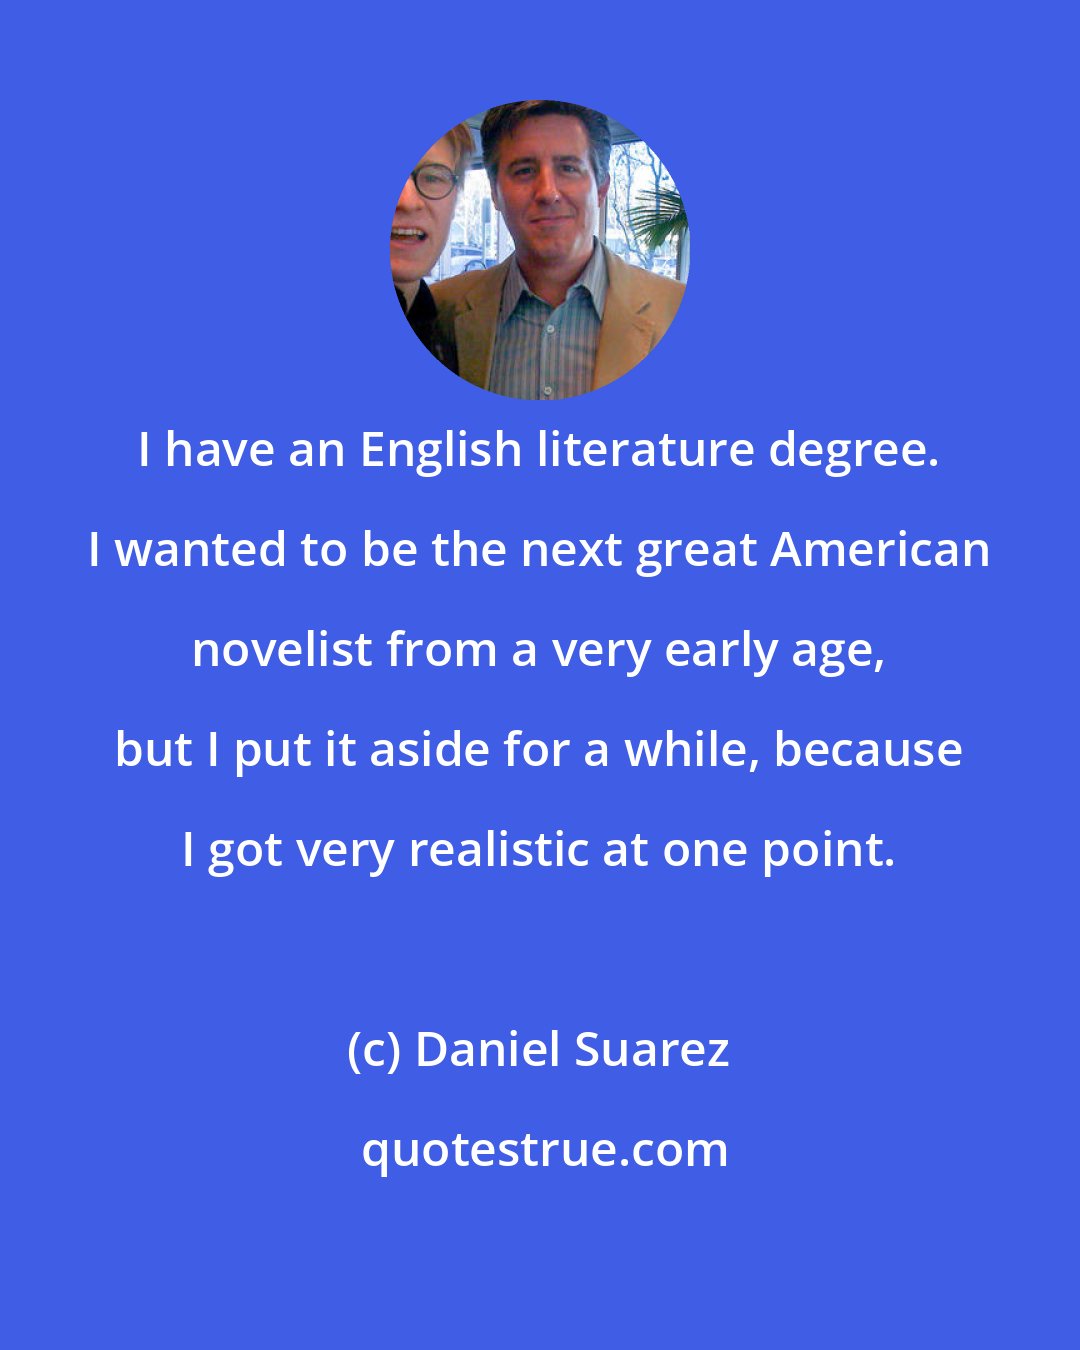 Daniel Suarez: I have an English literature degree. I wanted to be the next great American novelist from a very early age, but I put it aside for a while, because I got very realistic at one point.